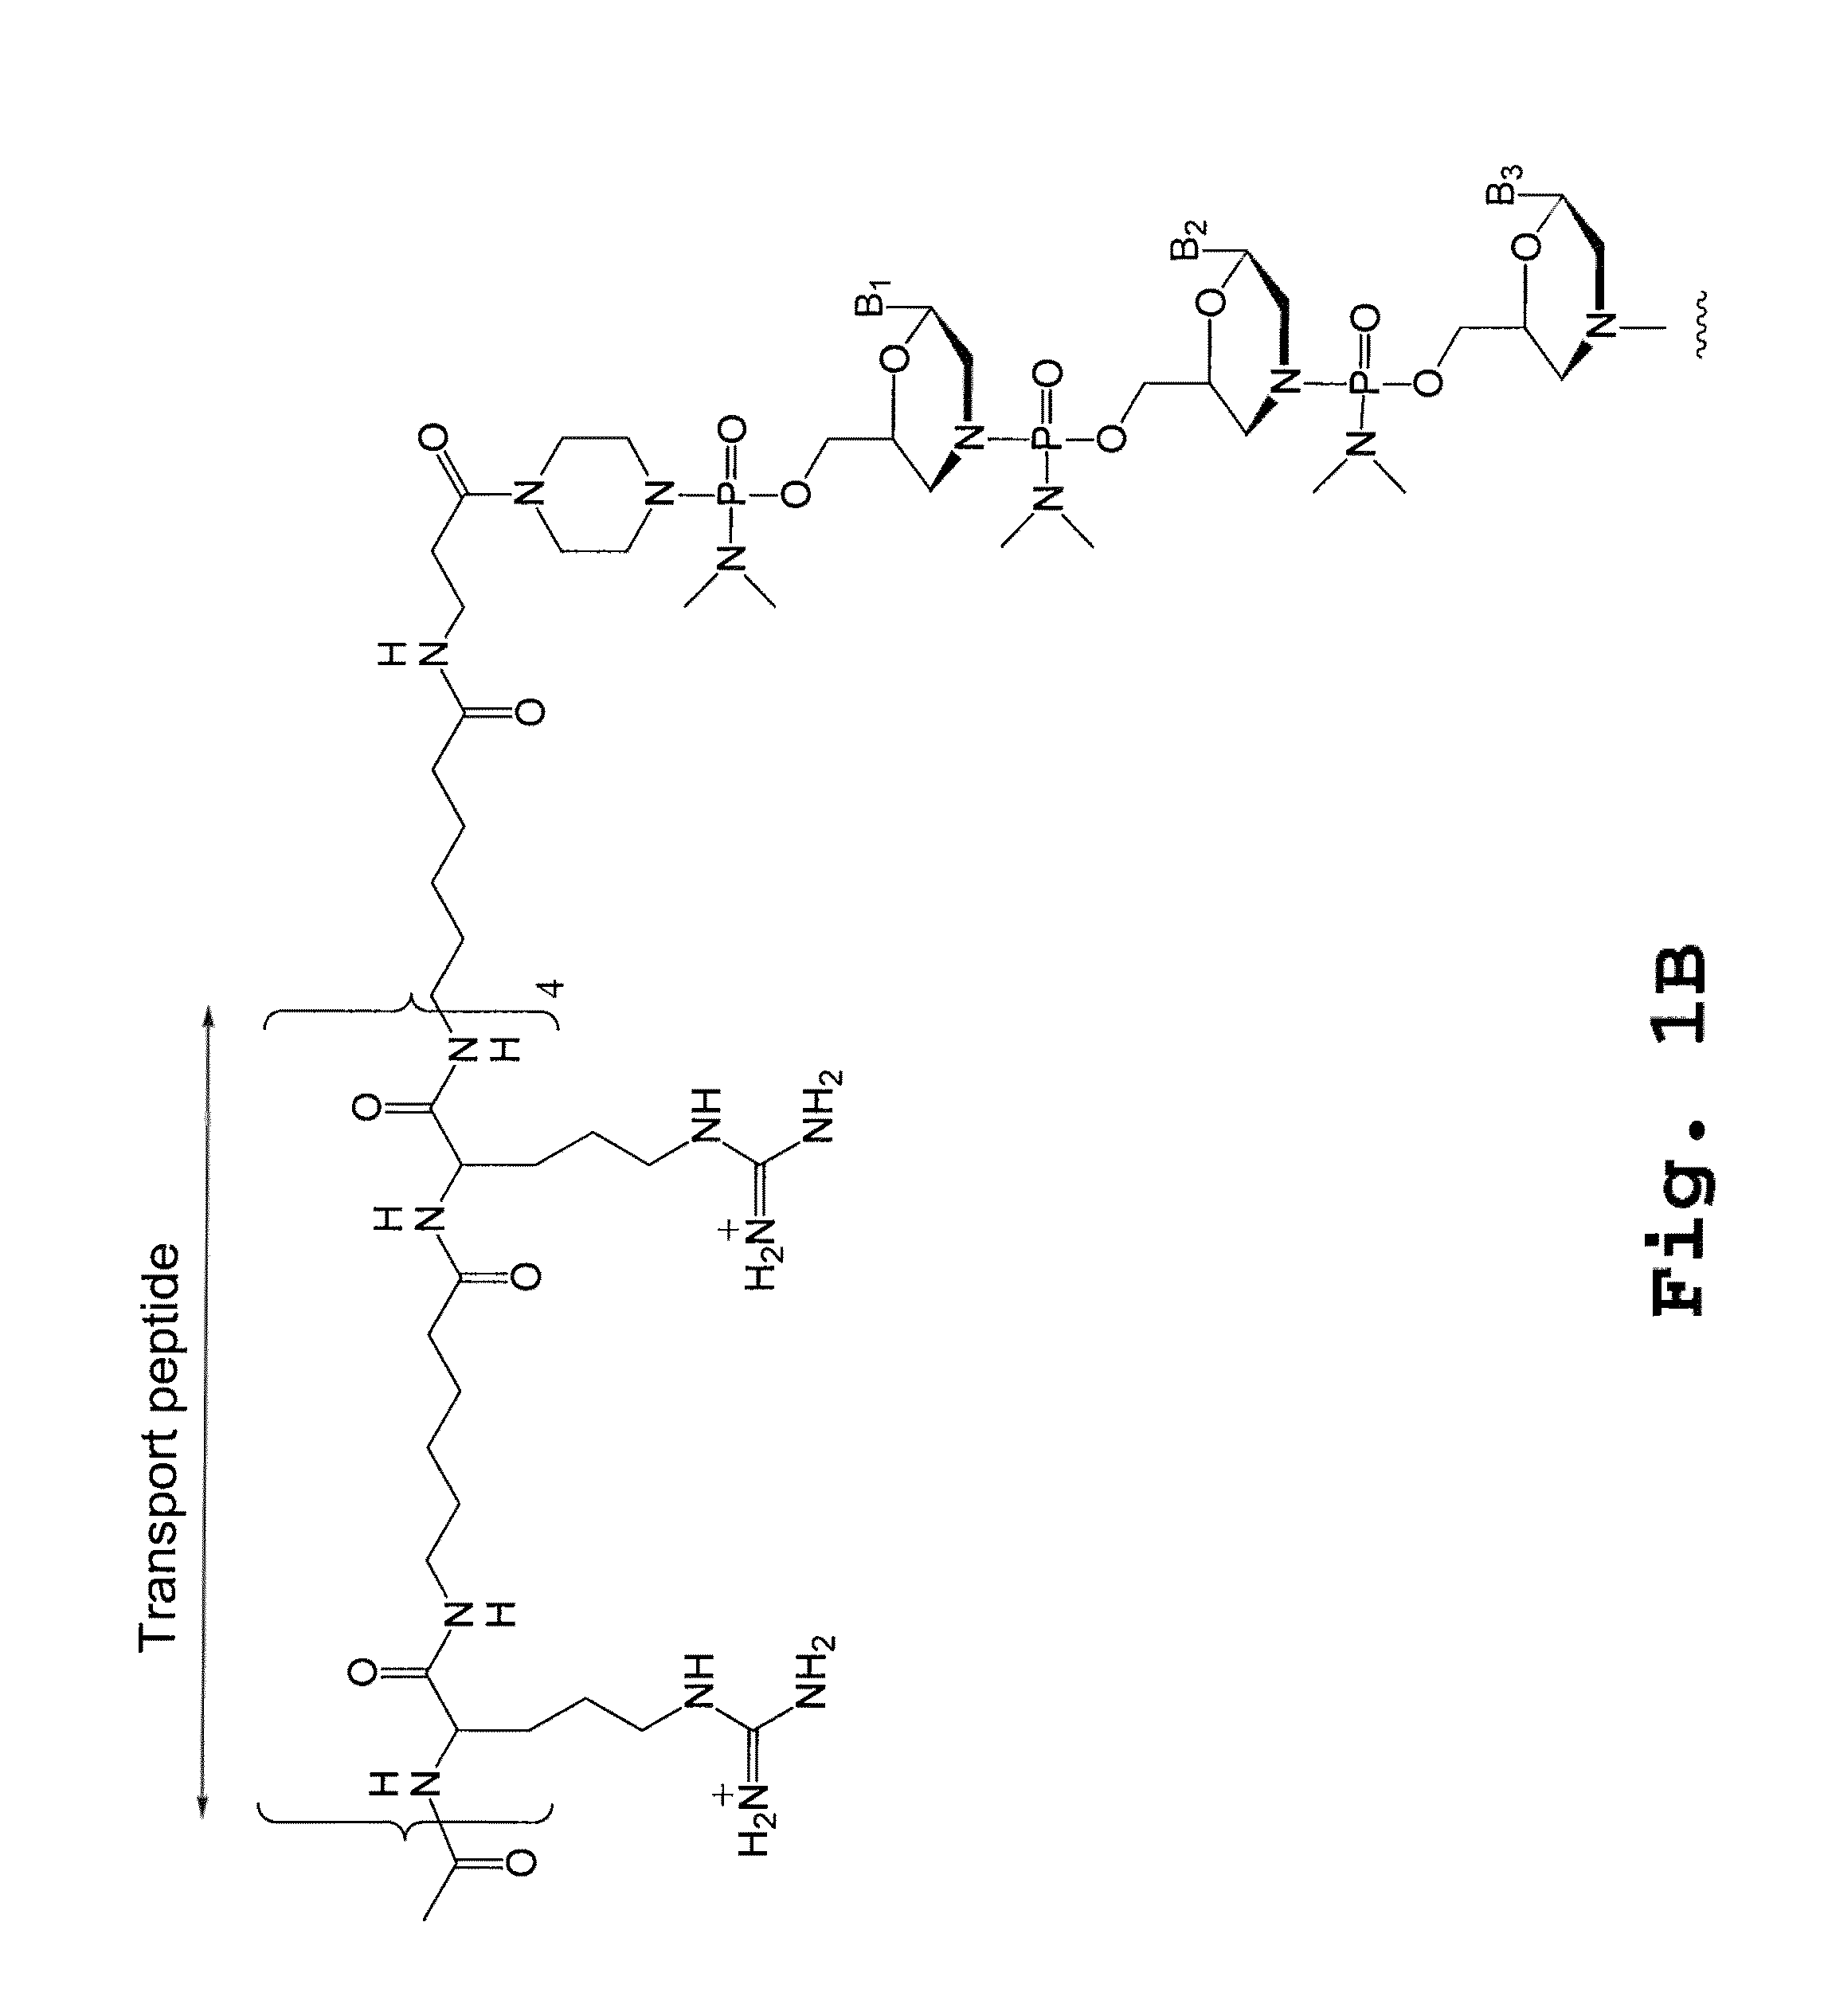 Compound and method for treating myotonic dystrophy